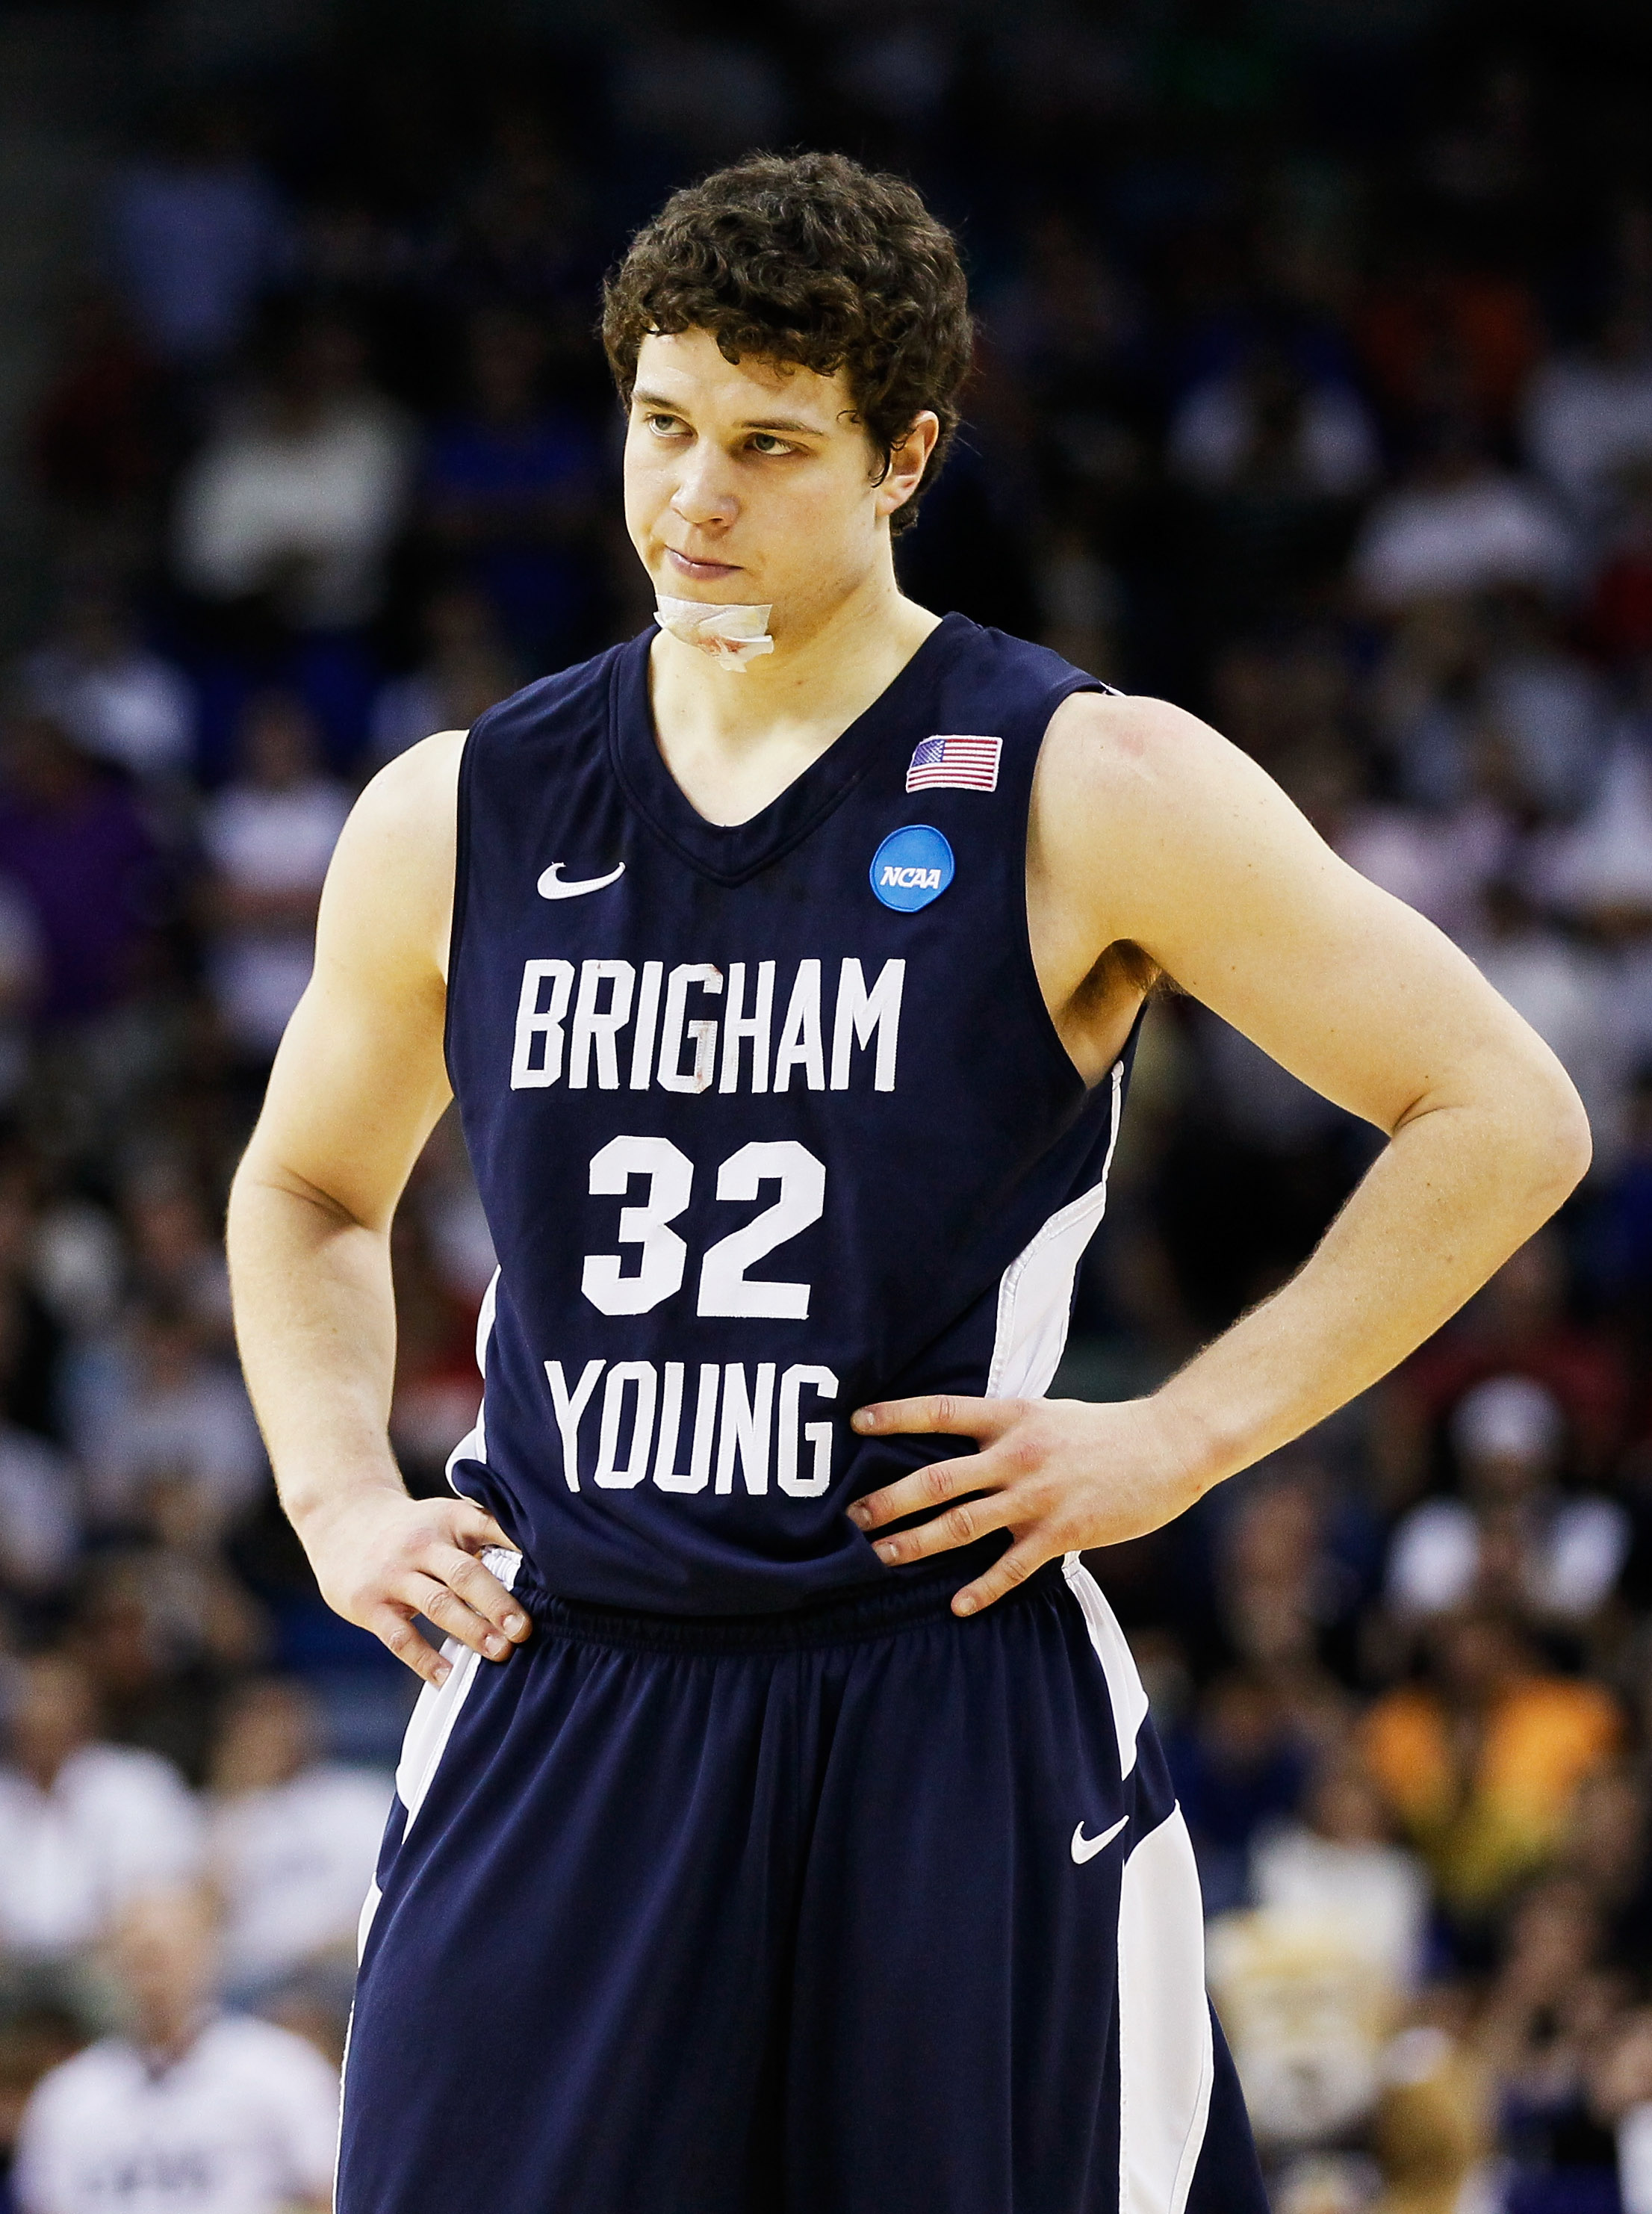 NEW ORLEANS, LA - MARCH 24:  Jimmer Fredette #32 of the Brigham Young Cougars reacts during their 74 to 83 loss to the Florida Gators in the Southeast regional of the 2011 NCAA men's basketball tournament at New Orleans Arena on March 24, 2011 in New Orle